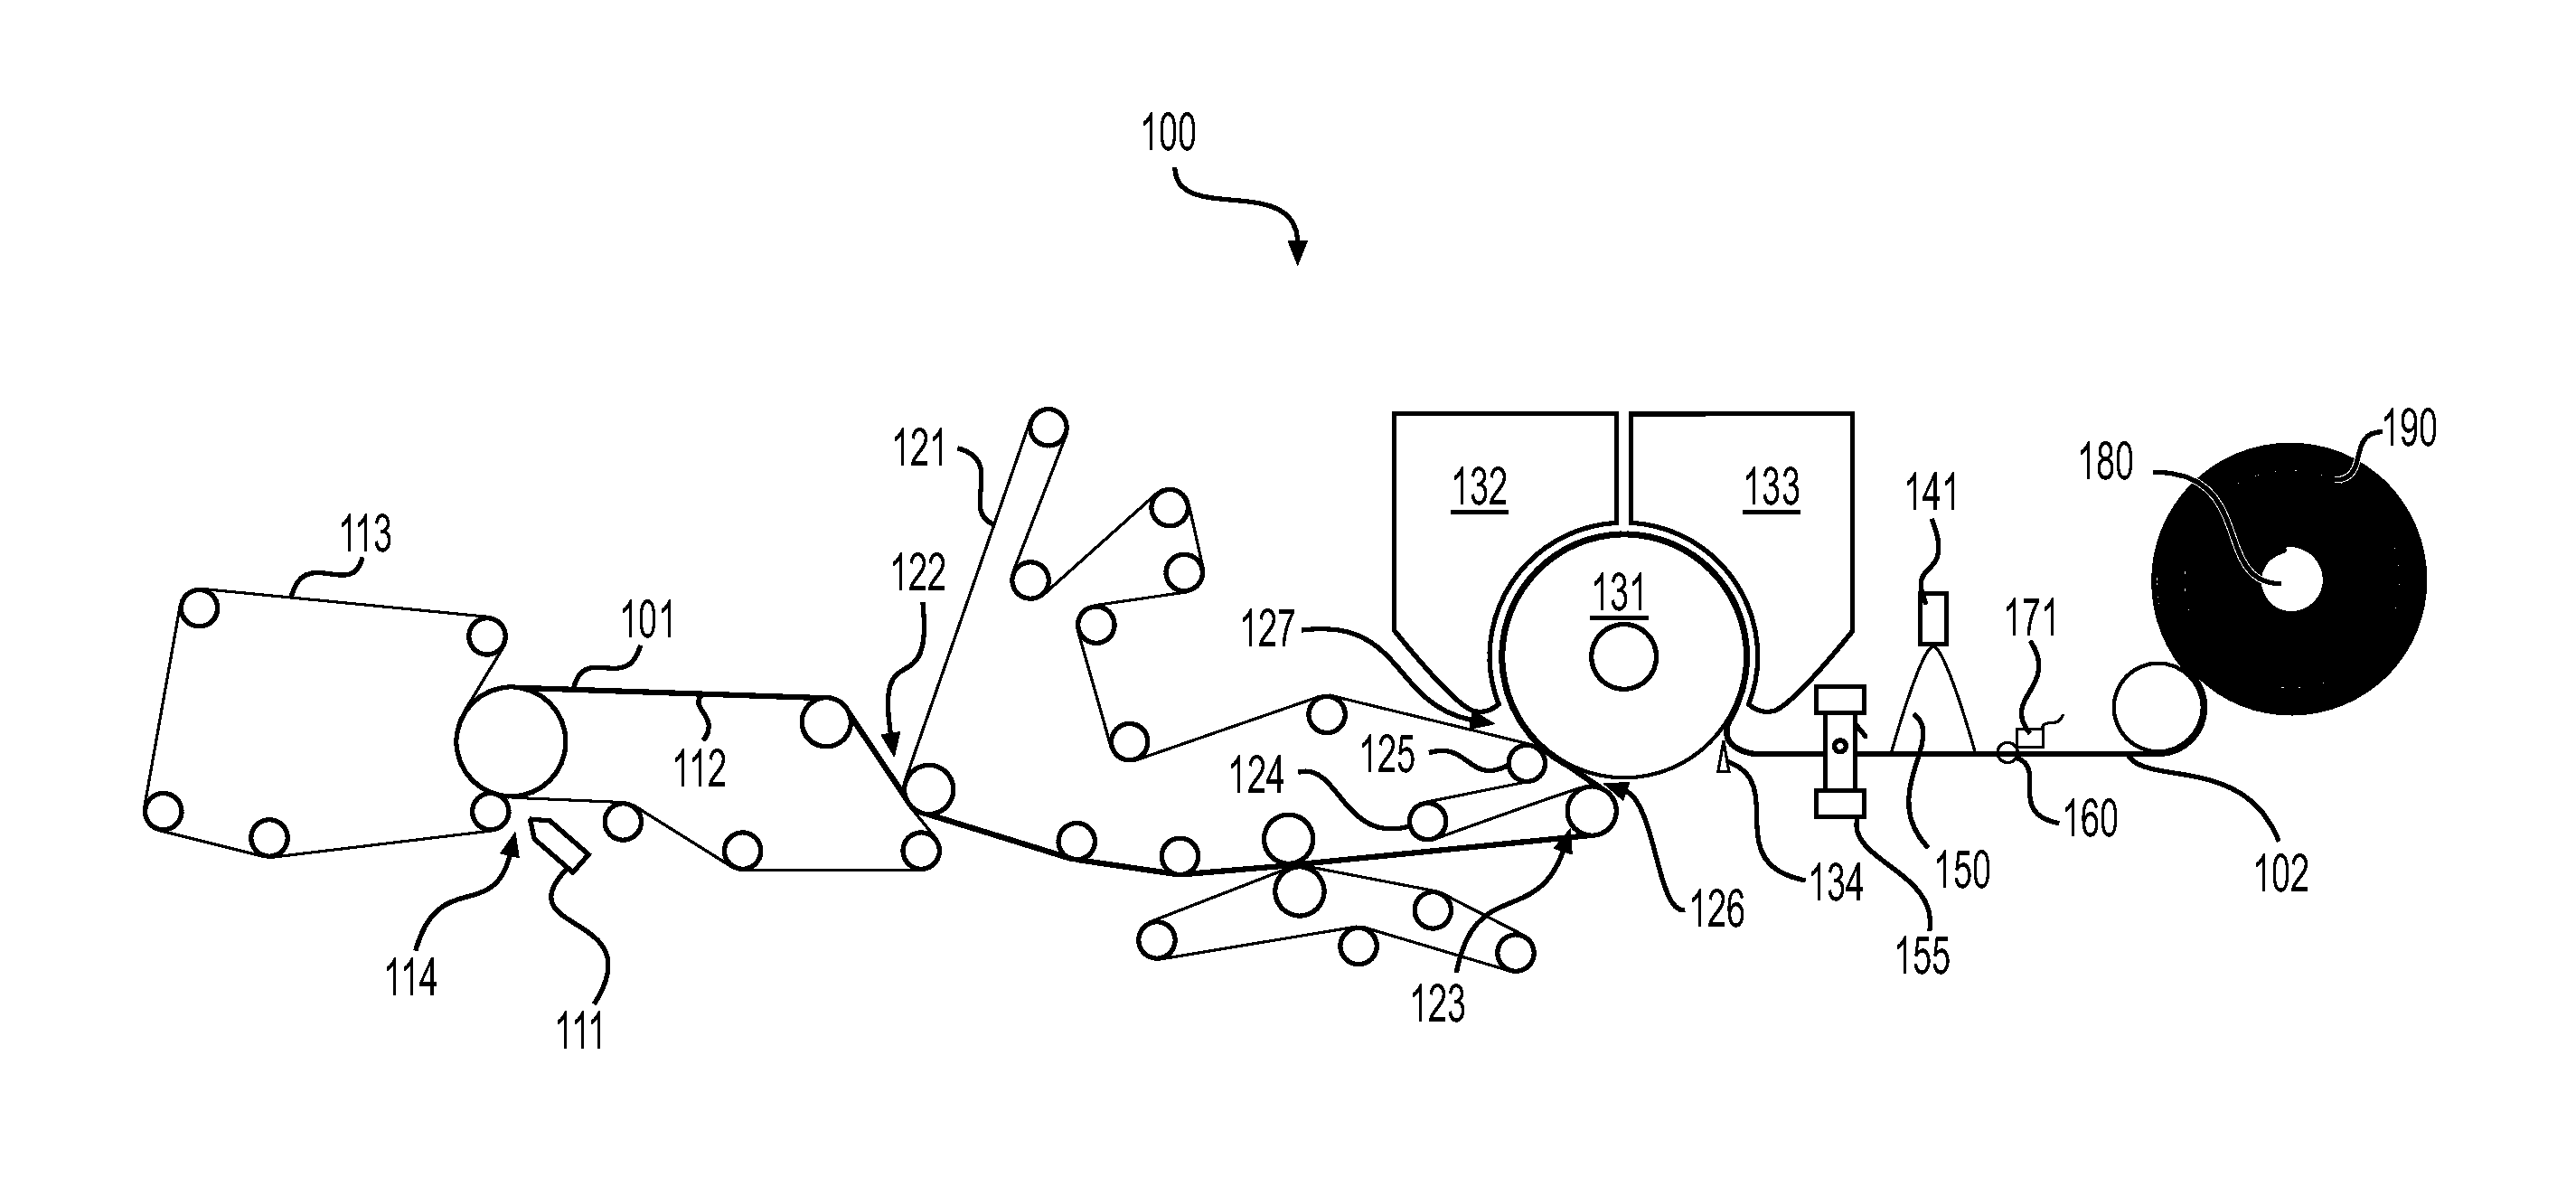 Methods and apparatuses for controlling a manufacturing line used to convert a paper web into paper products by reading marks on the paper web